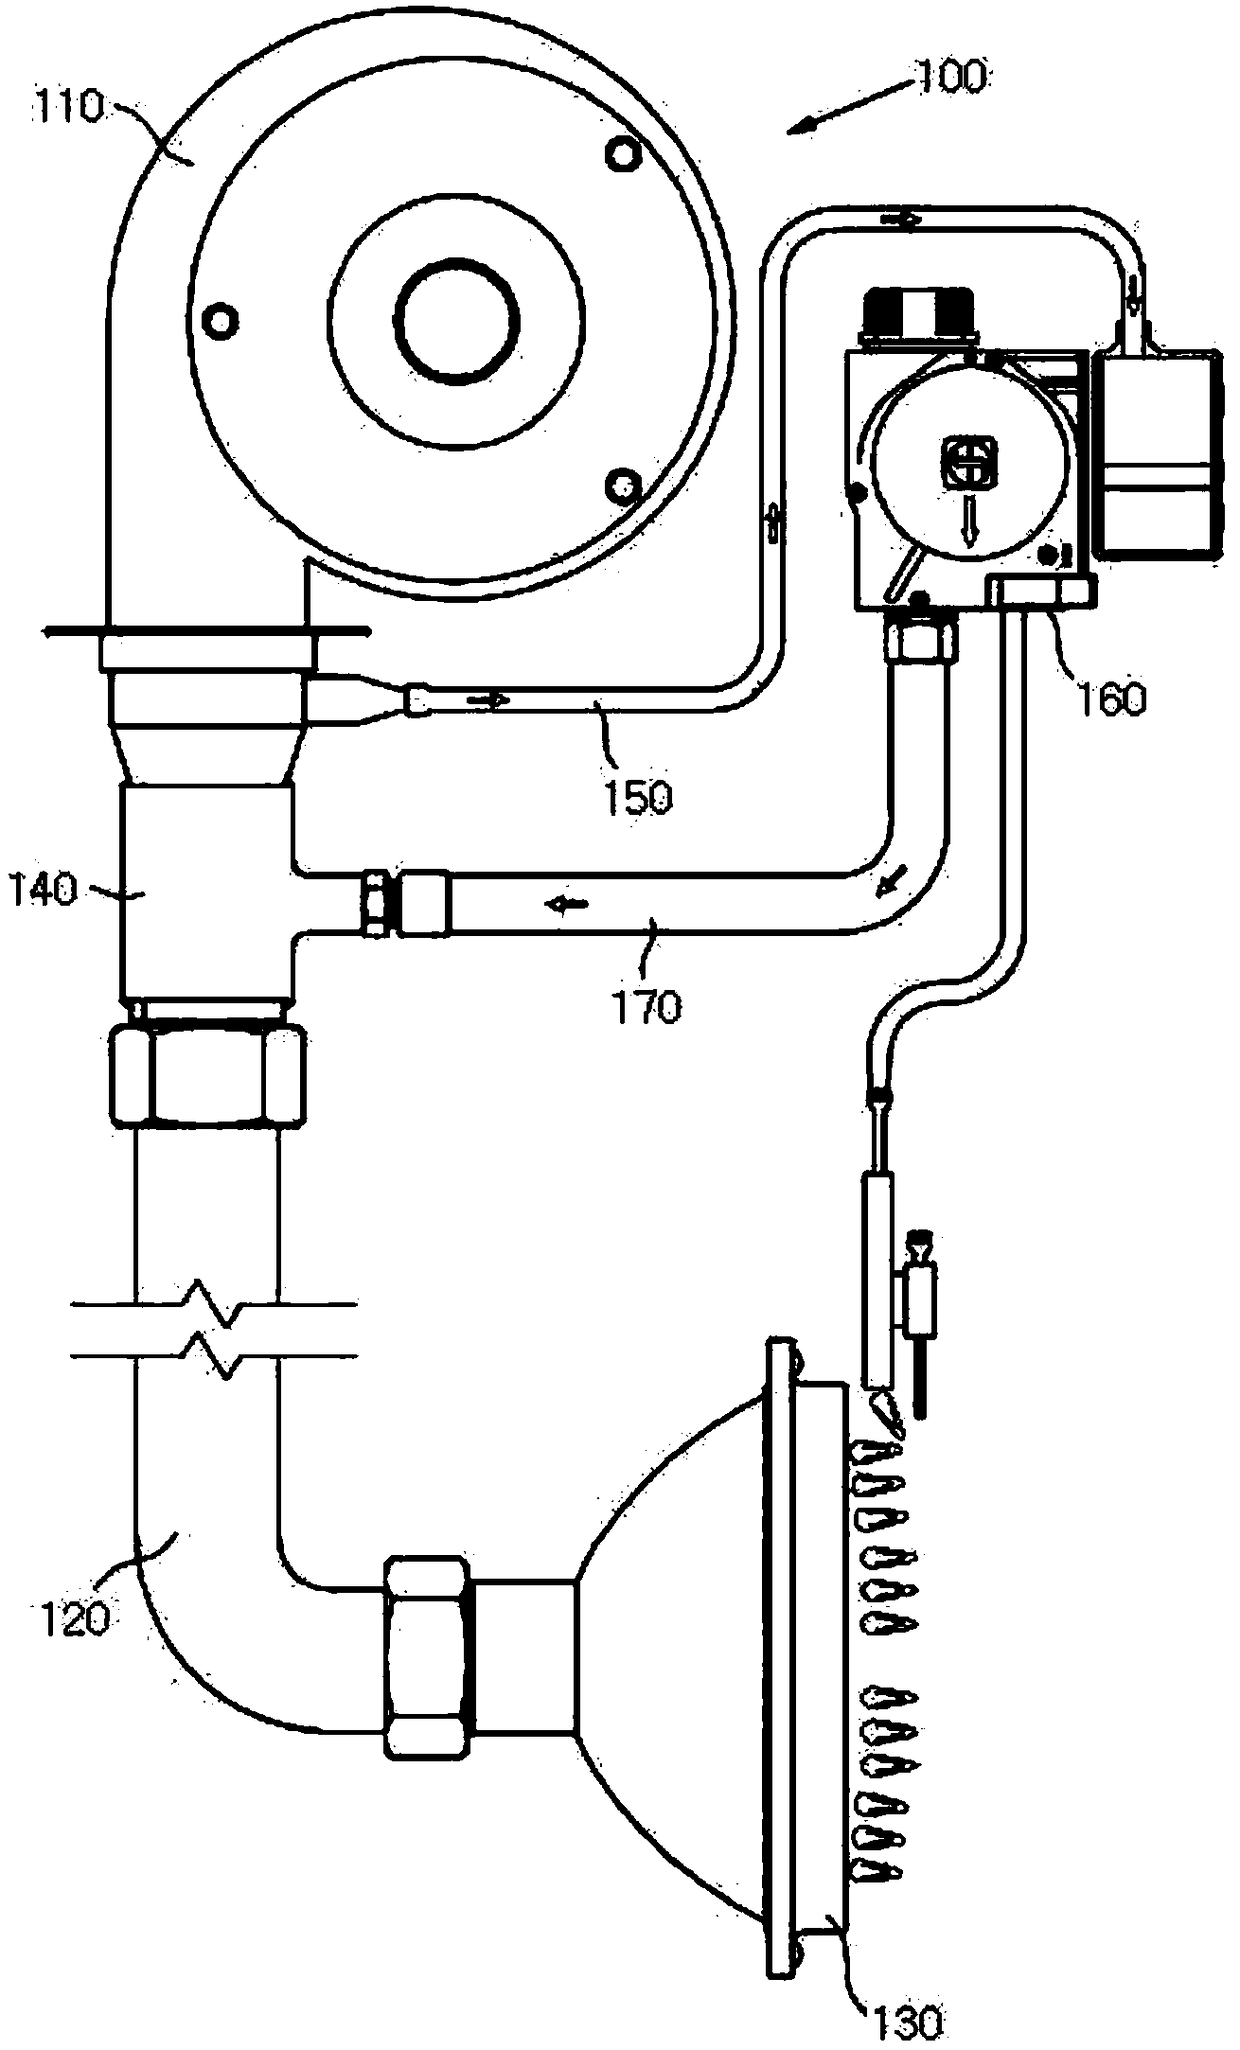 Air proportional controller for gas burners